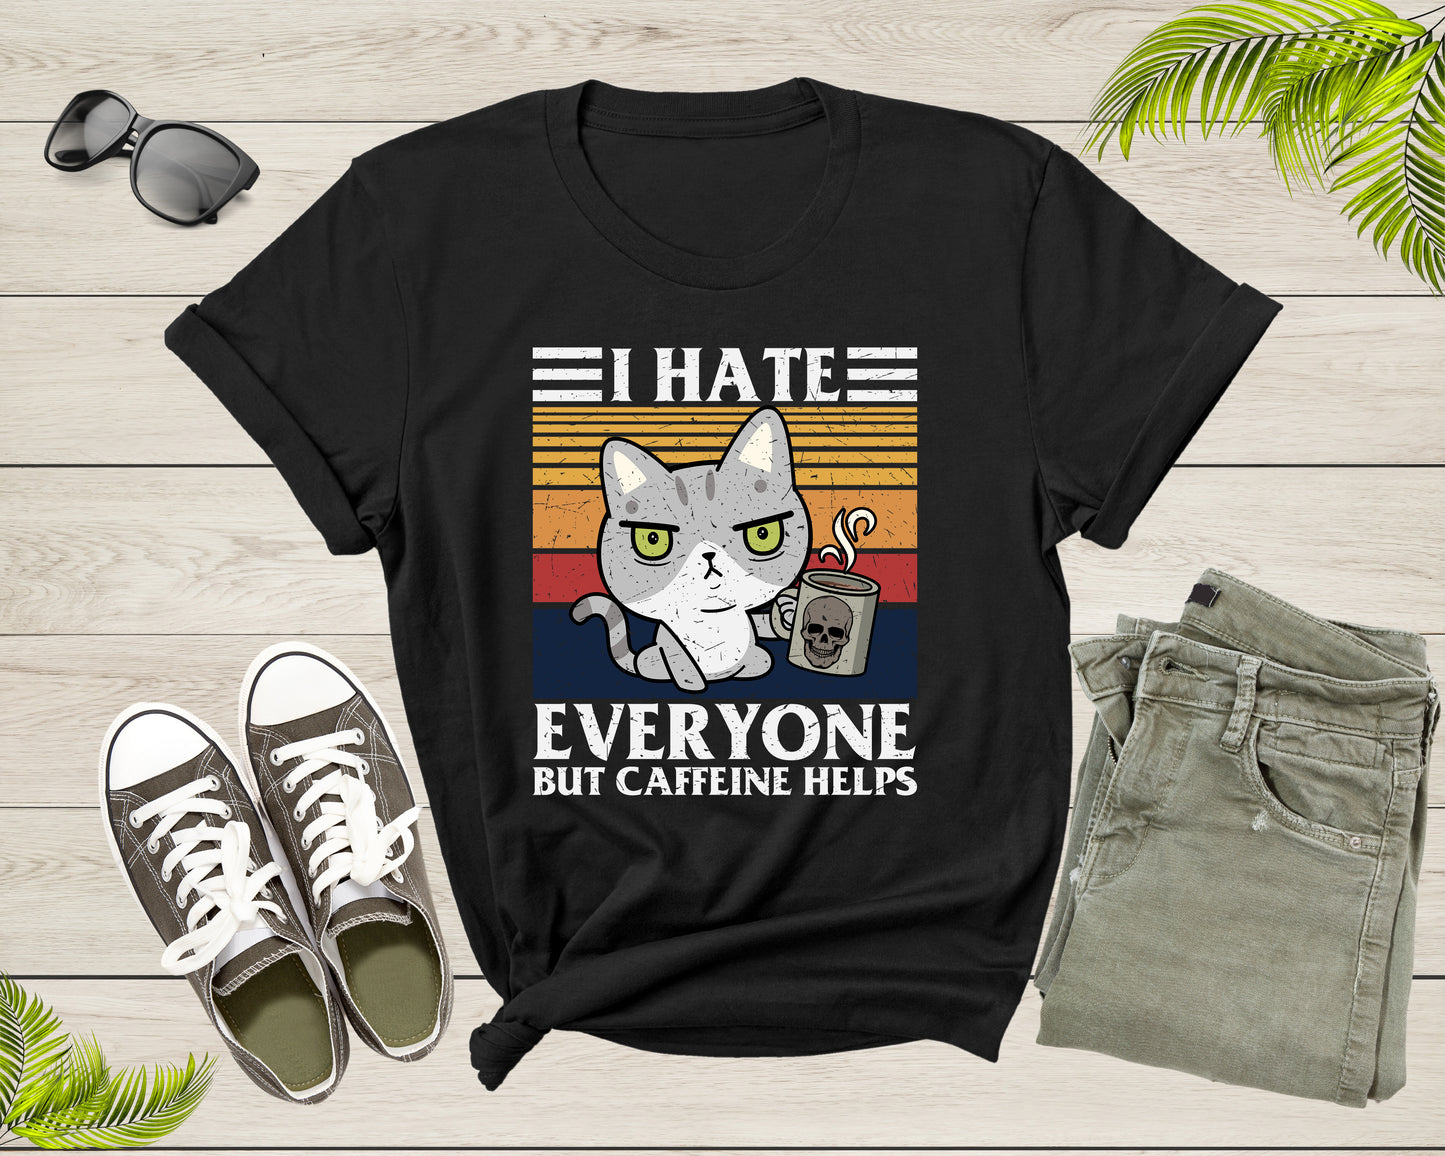 I Hate Everyone But Caffeine Helps Funny Sarcastic Angry Cat T-Shirt Angry Cat Lover Gift T Shirt for Men Women Kids Boys Girls Tshirt